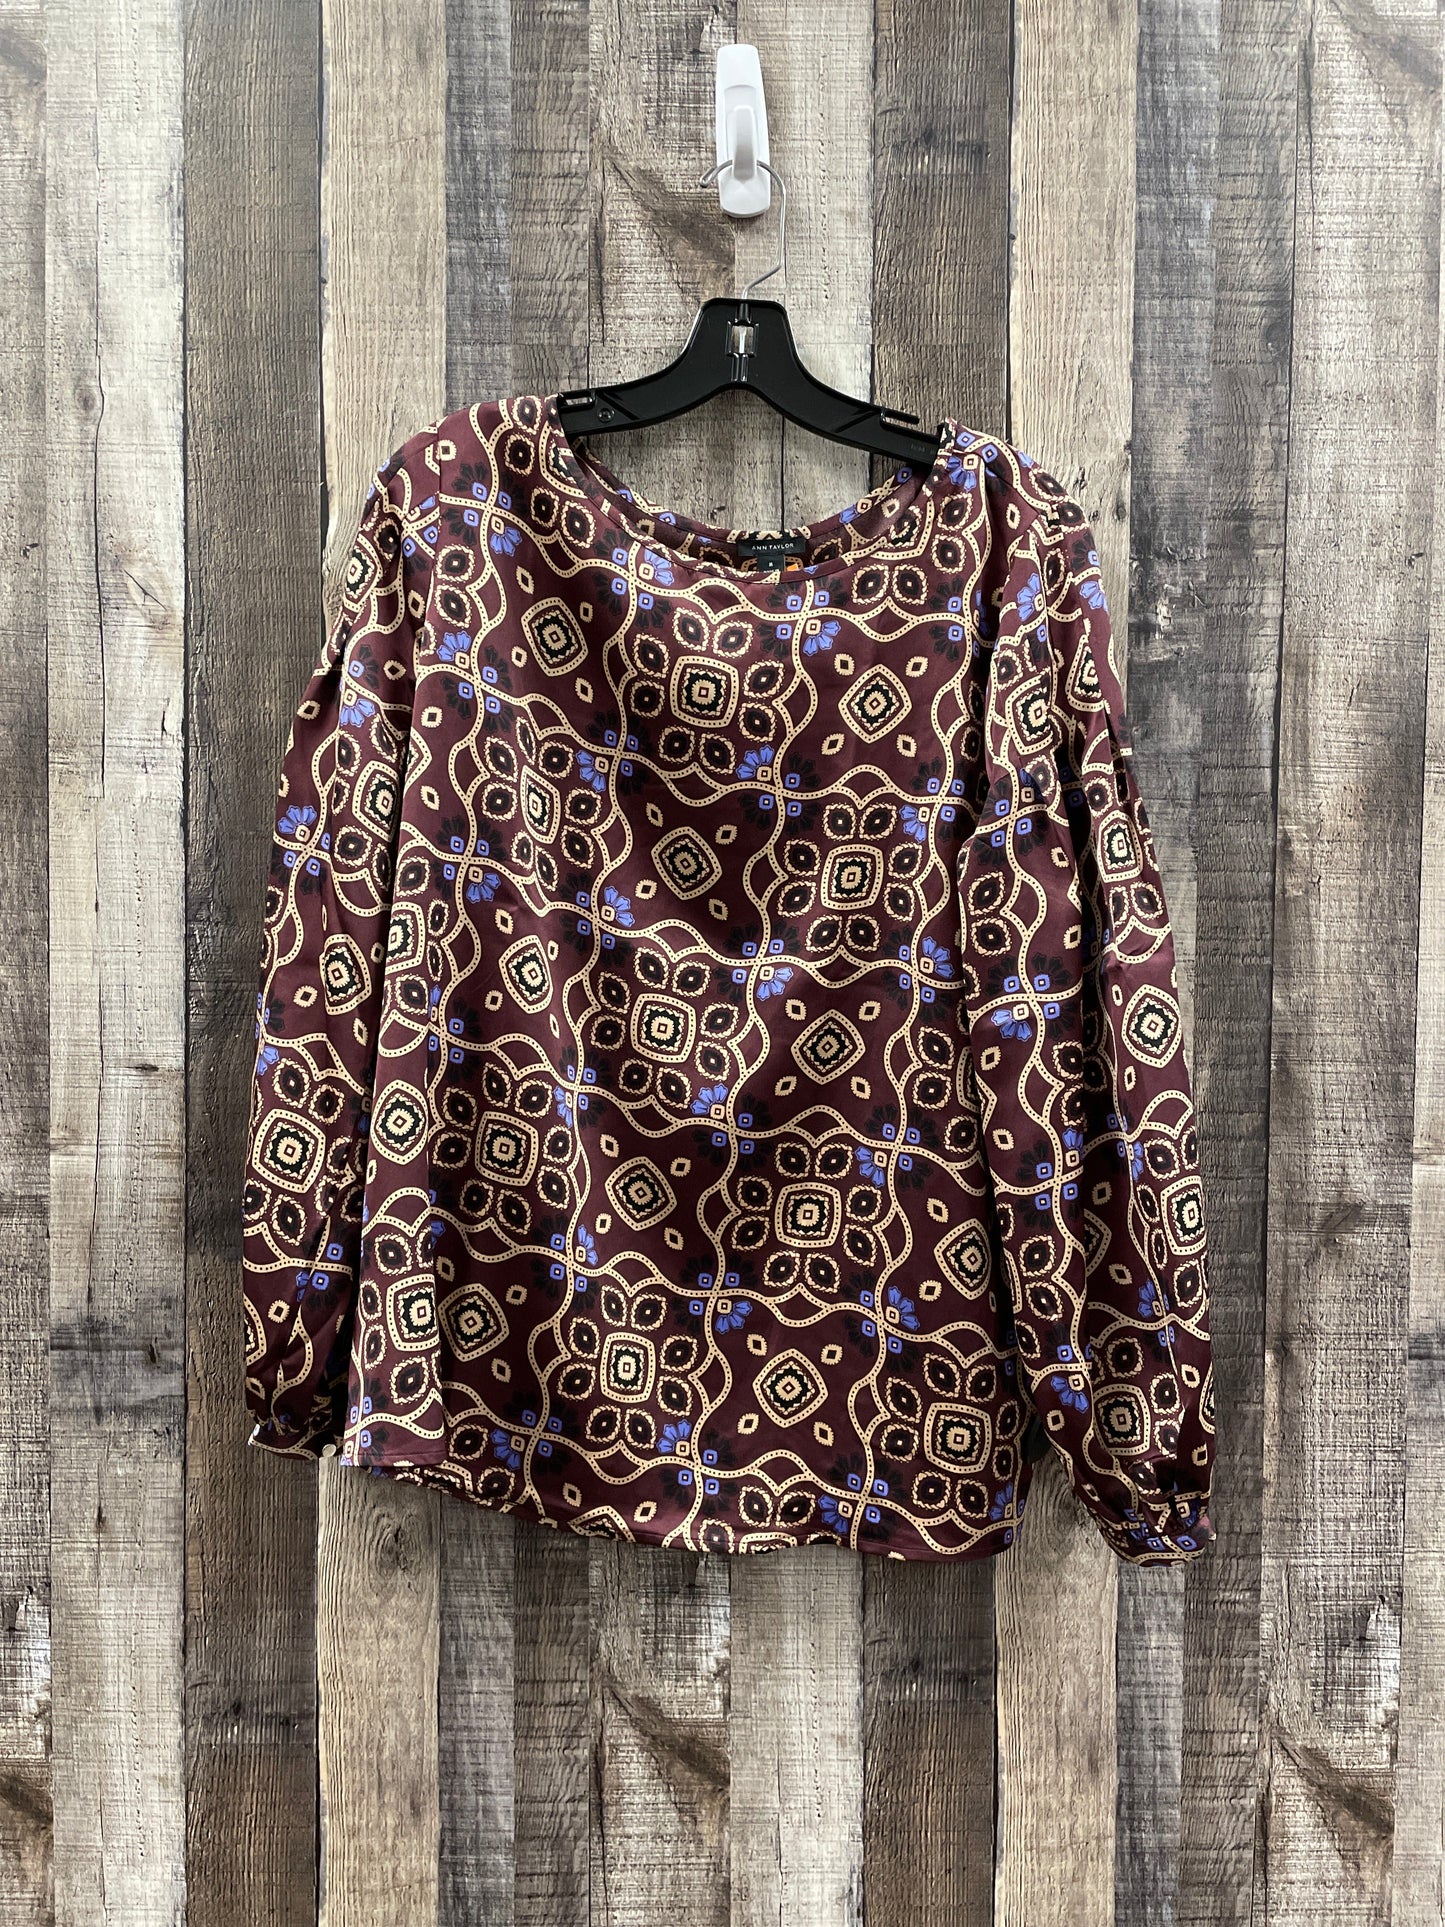 Top Long Sleeve By Ann Taylor  Size: M